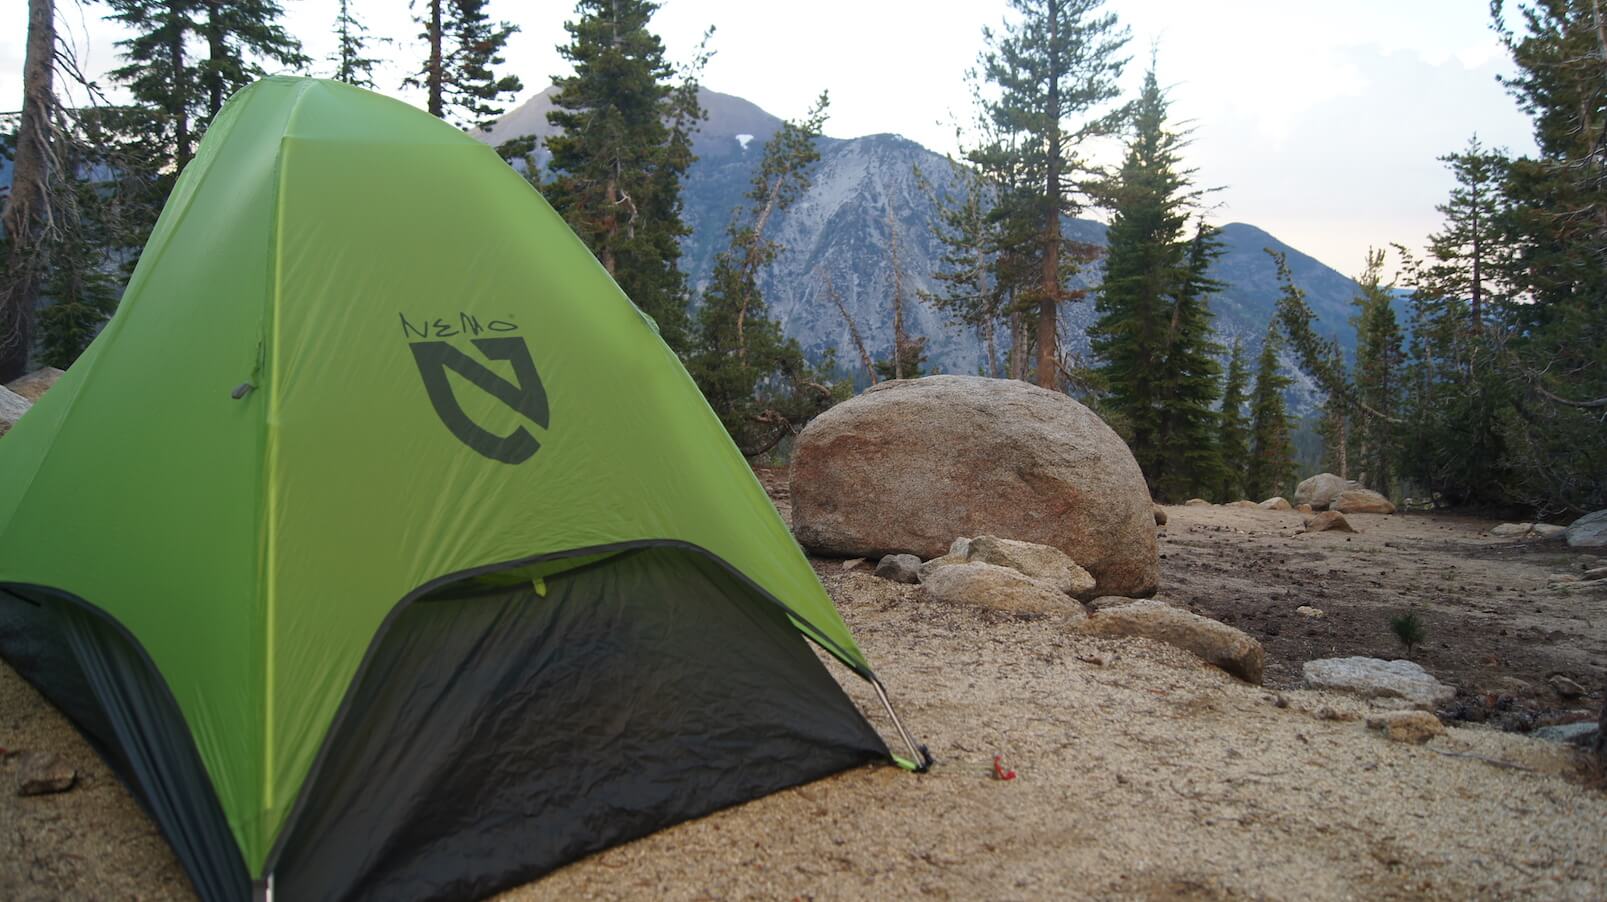 A green tent on a sandy gravel plot with a boulder behind, with pine trees and mountains in the background